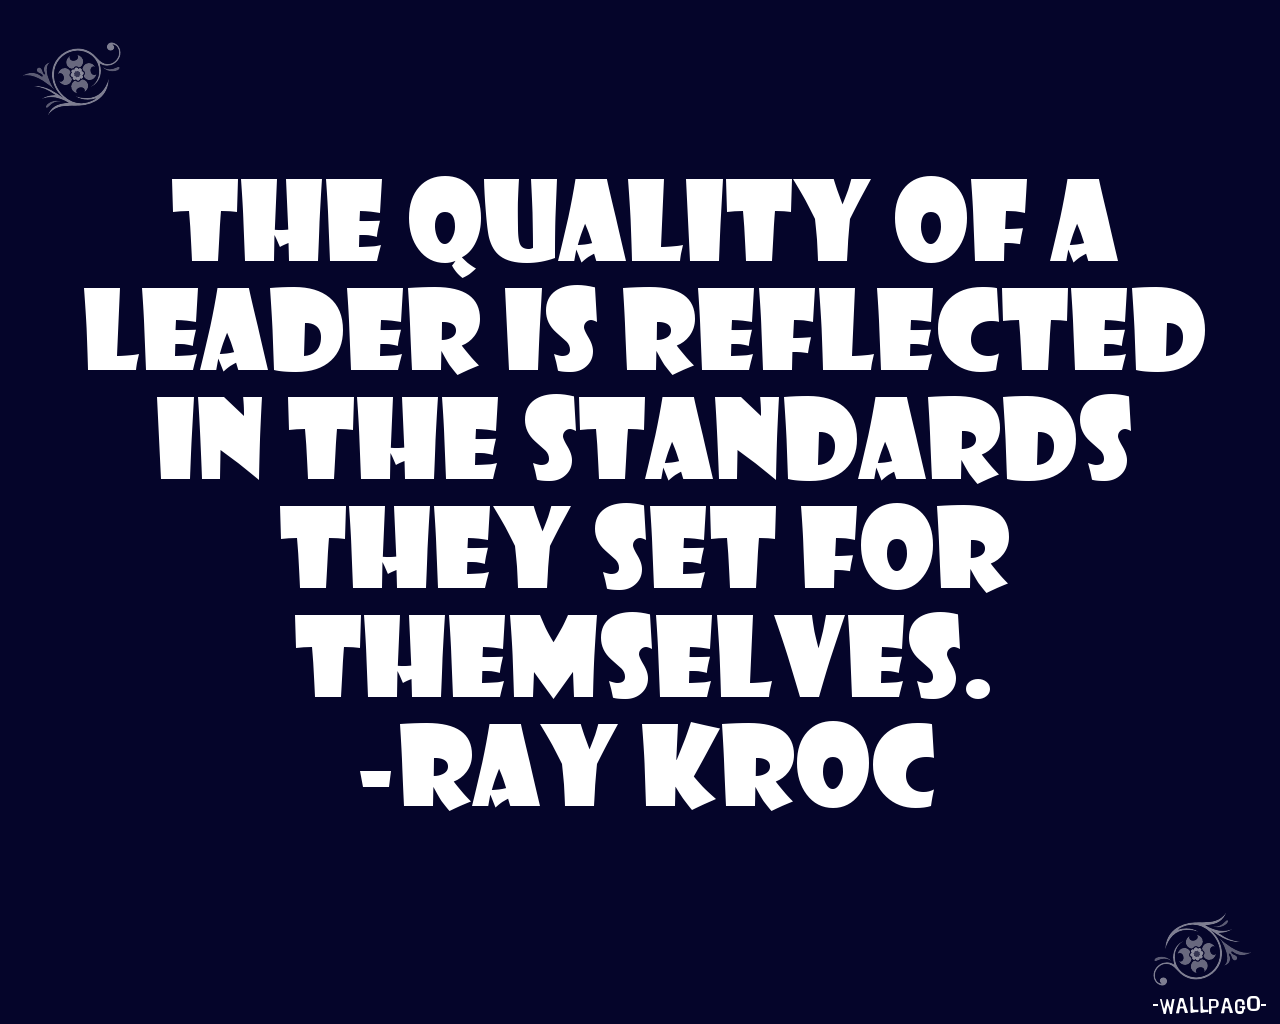 The quality of a leader is reflected in the standards they set for themselves..